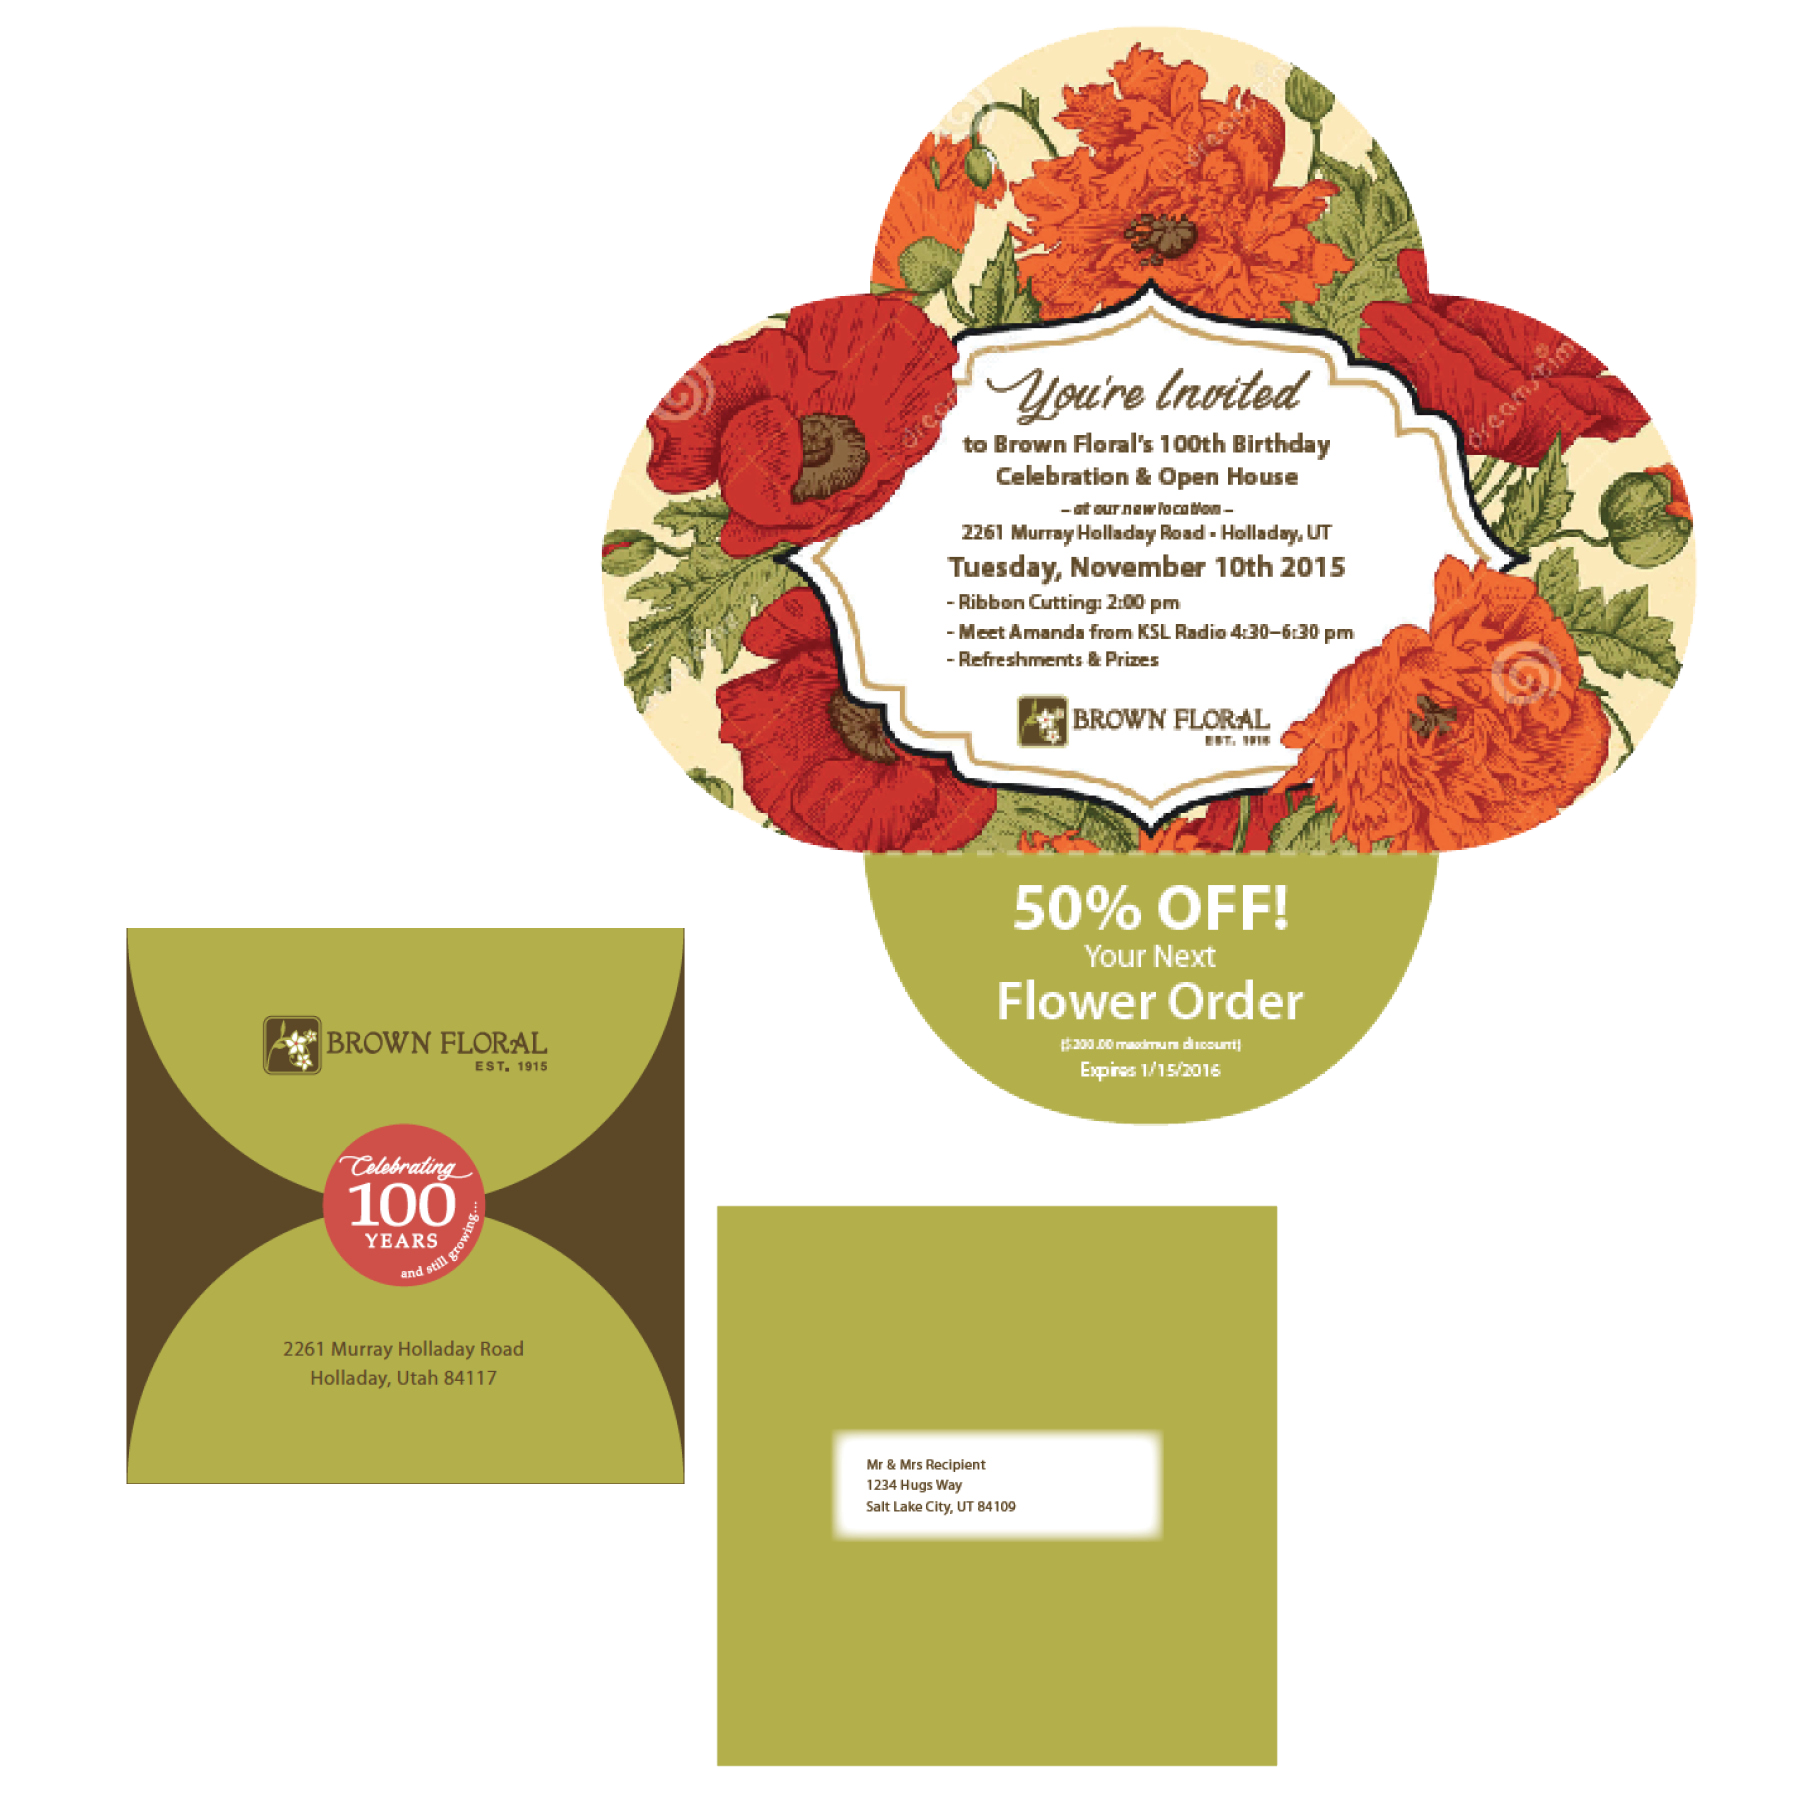 Brown Floral Self-Mailer Designed by EXPAND